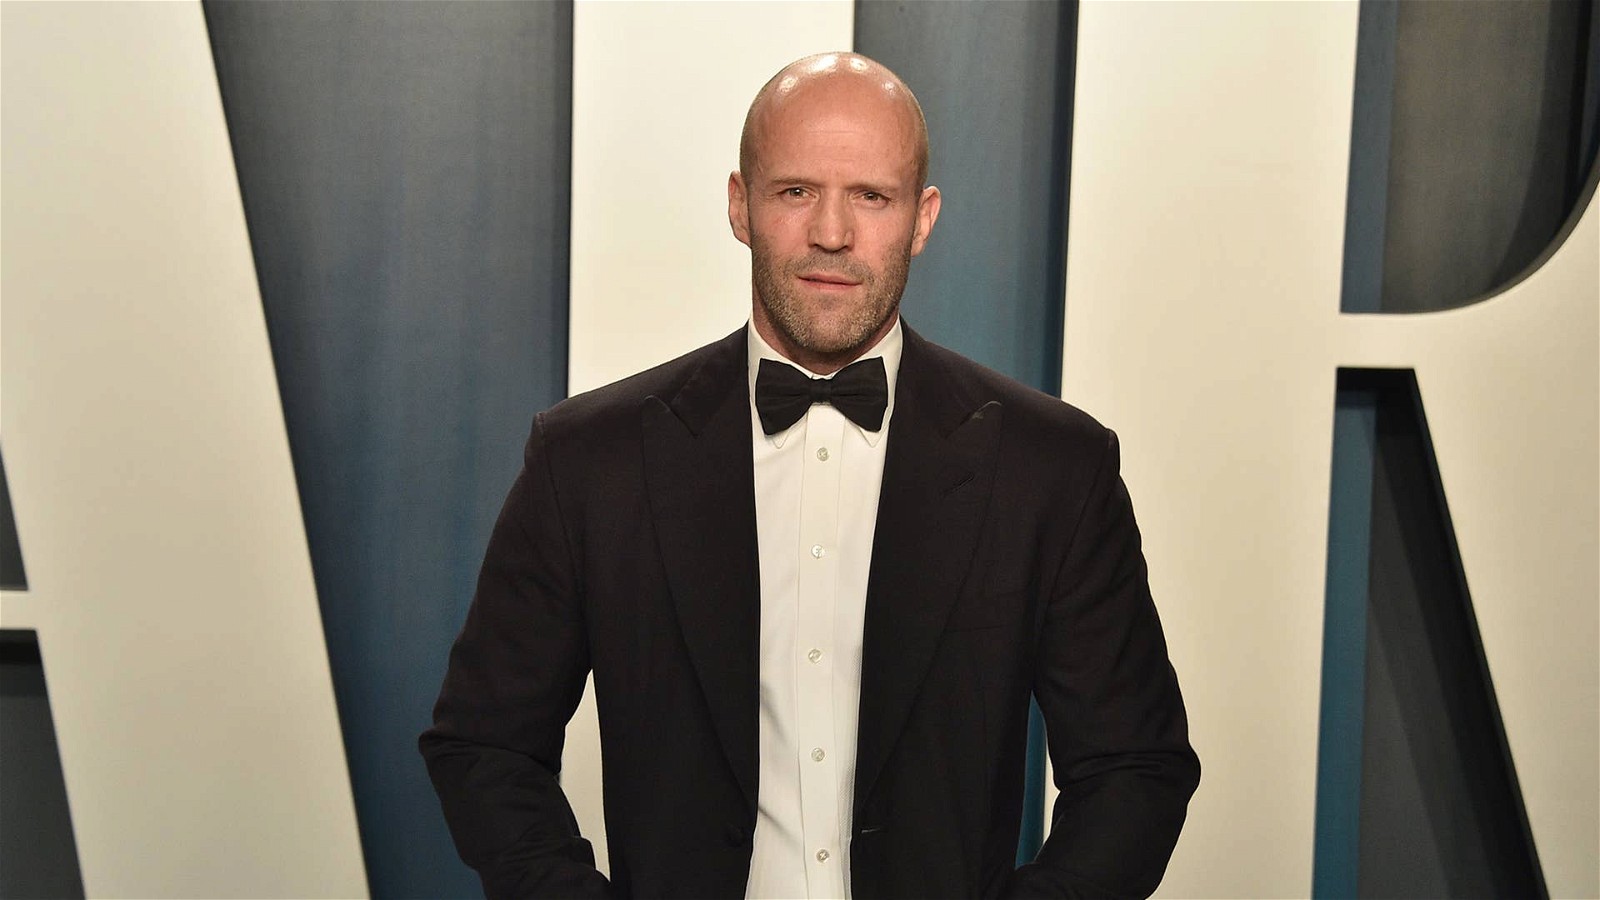 Jason Statham is one of the best action stars of Hollywood